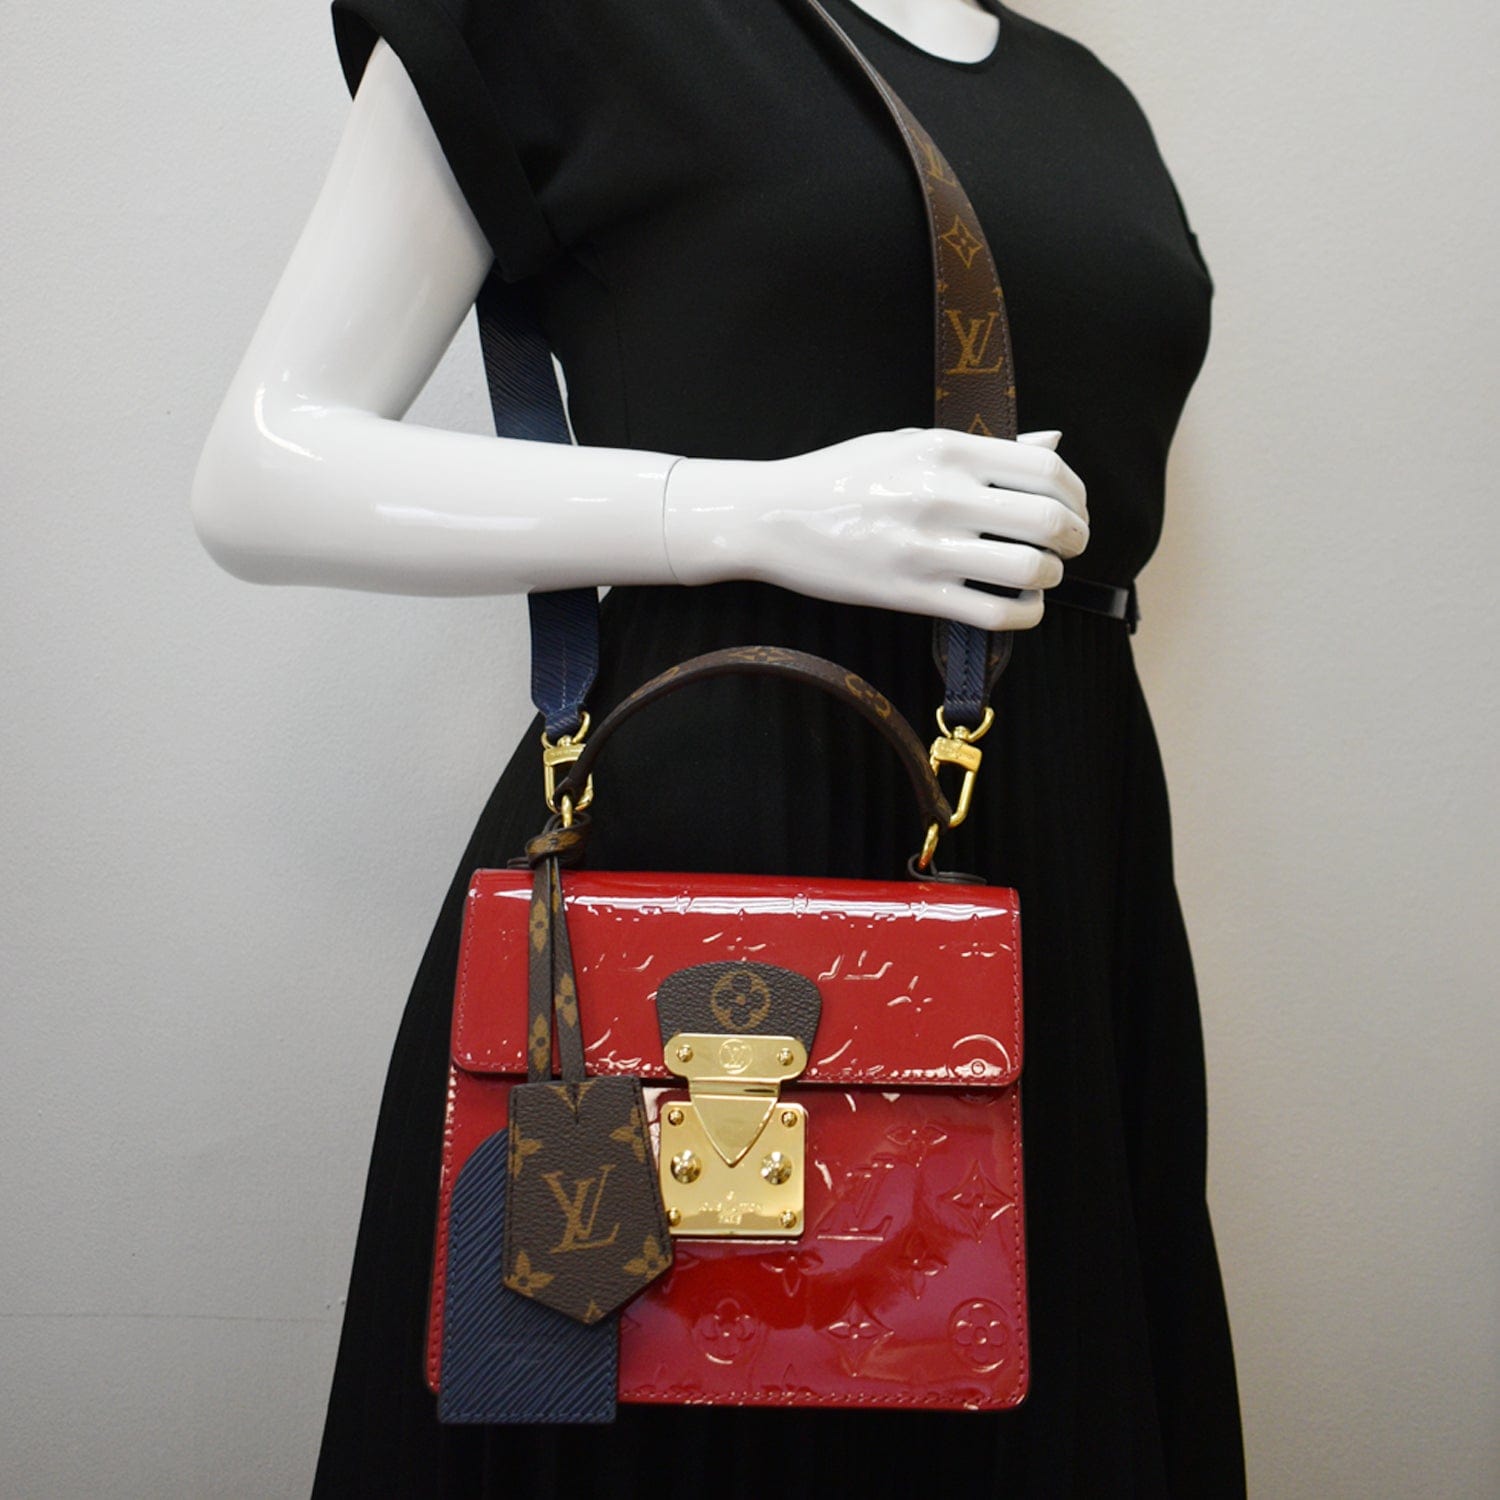 LOUIS VUITTON Spring Street Vernis Leather Crossbody Bag Red